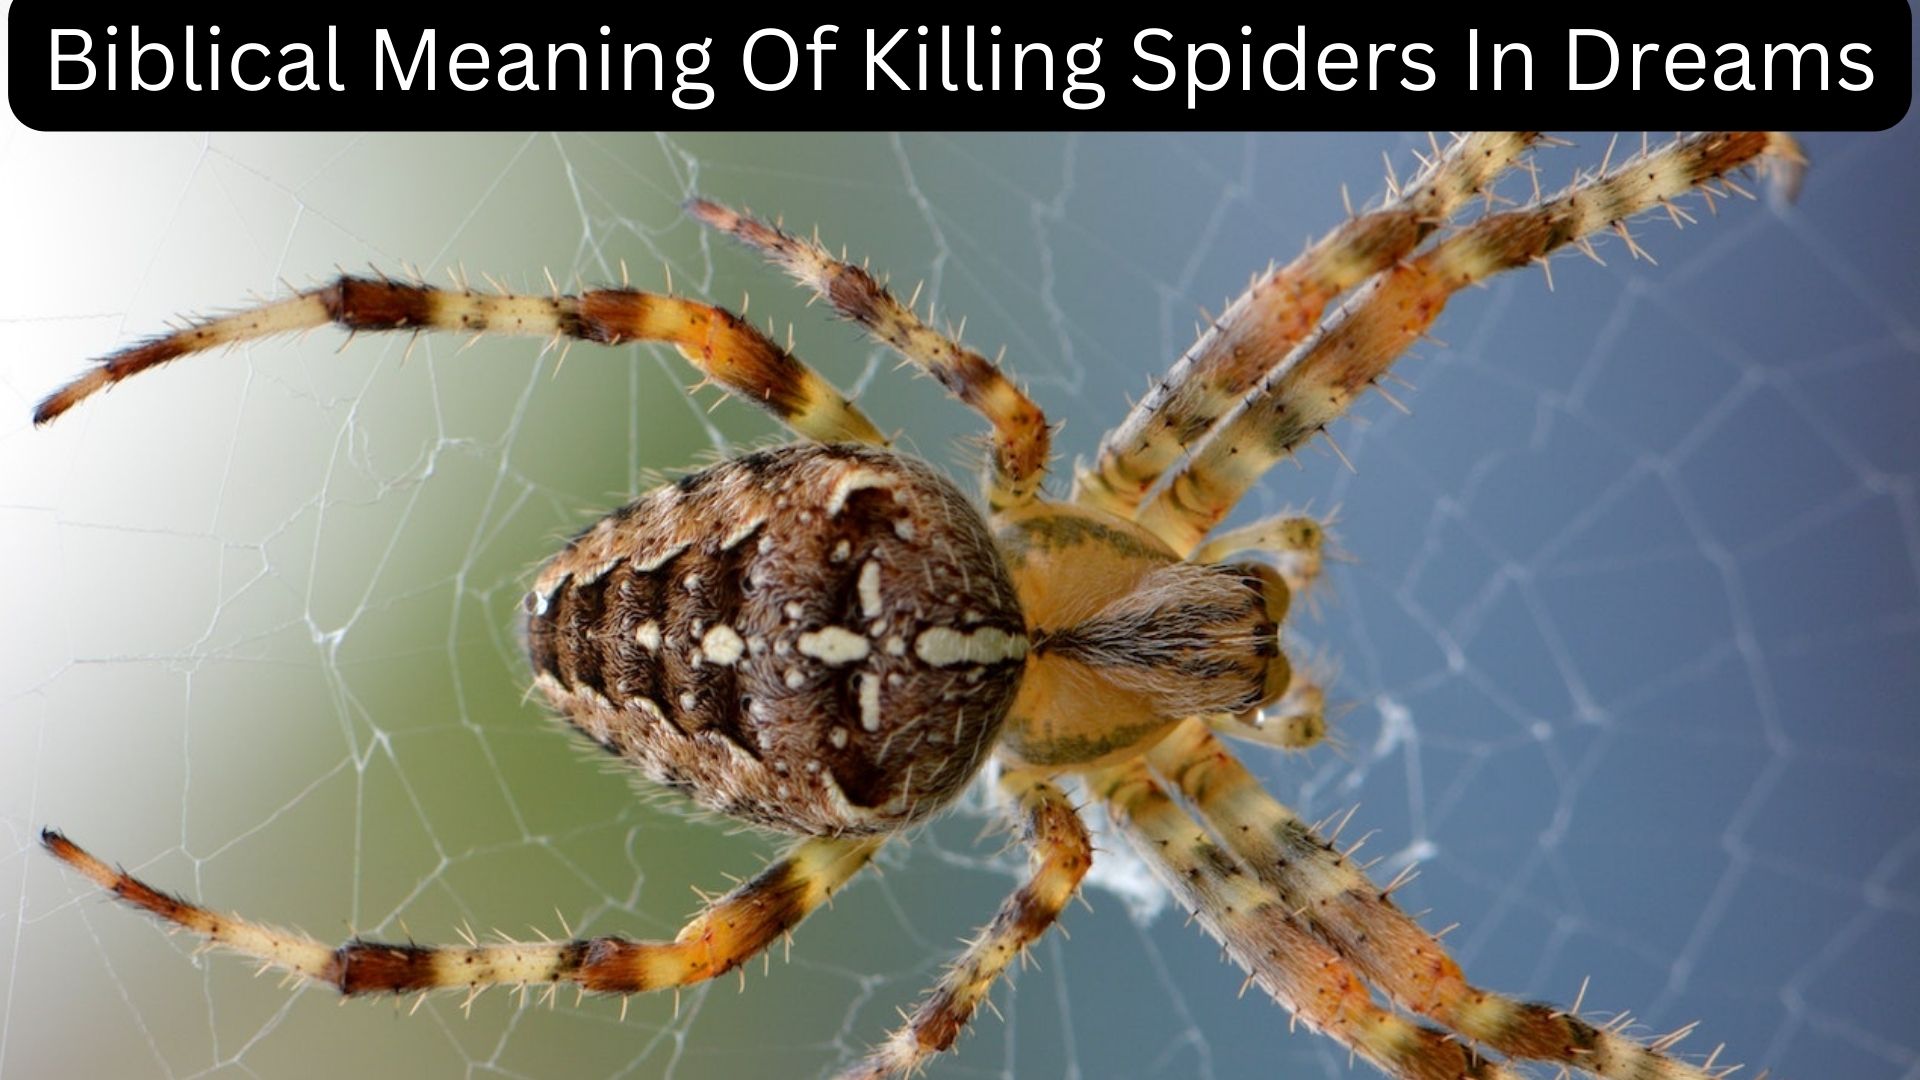 Biblical Meaning Of Killing Spiders In Dreams - Greed And Envy